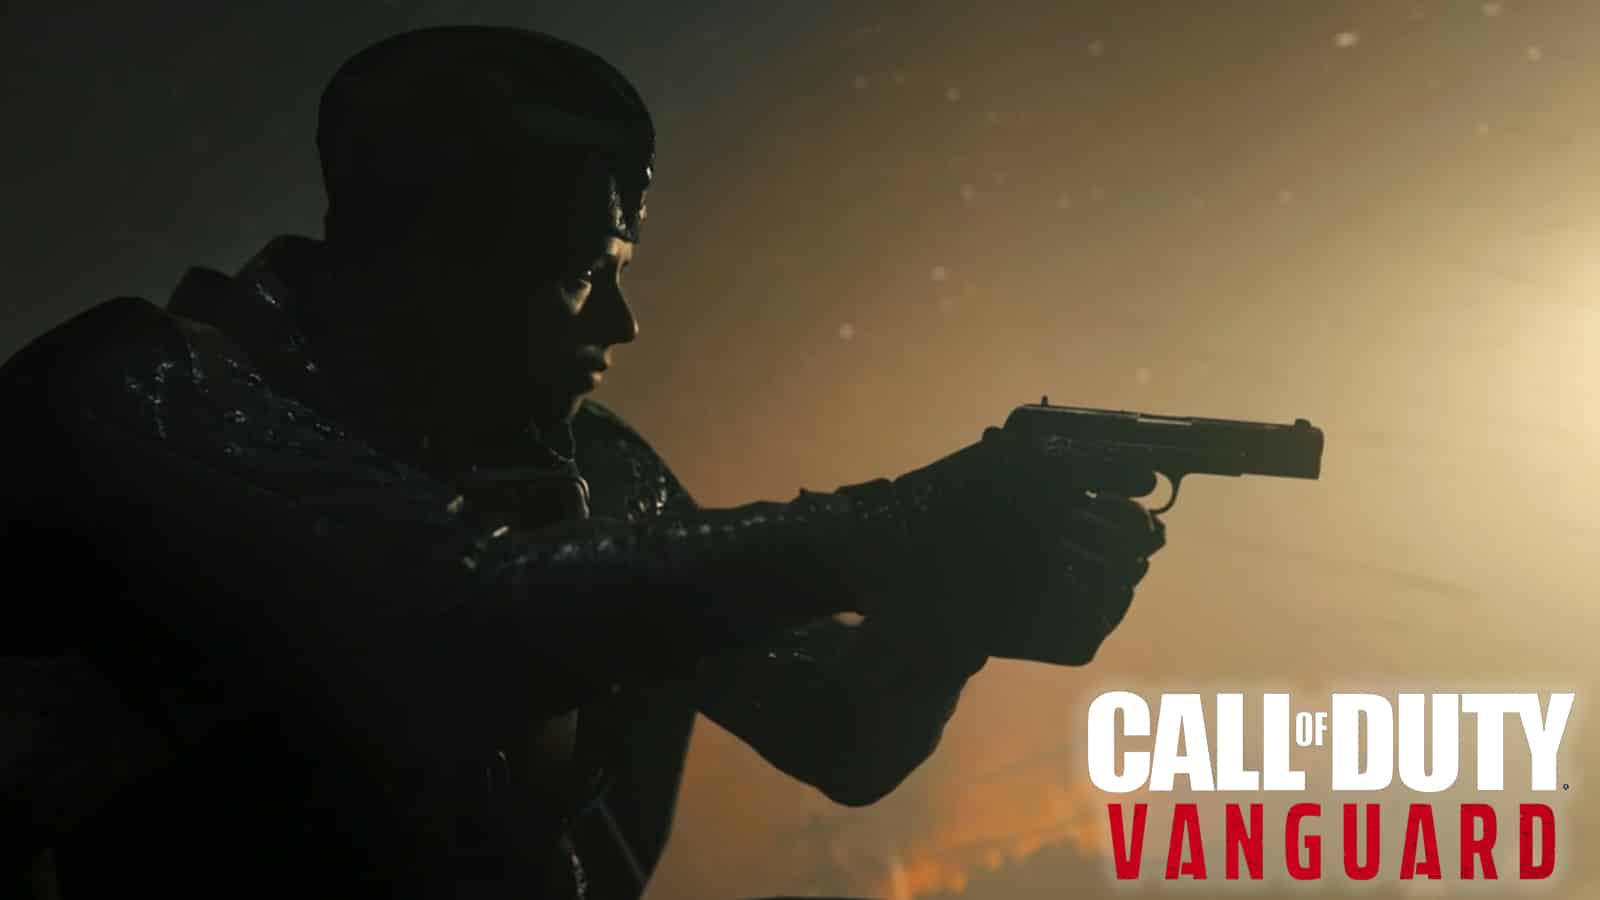 An image of Call of Duty Vanguard.